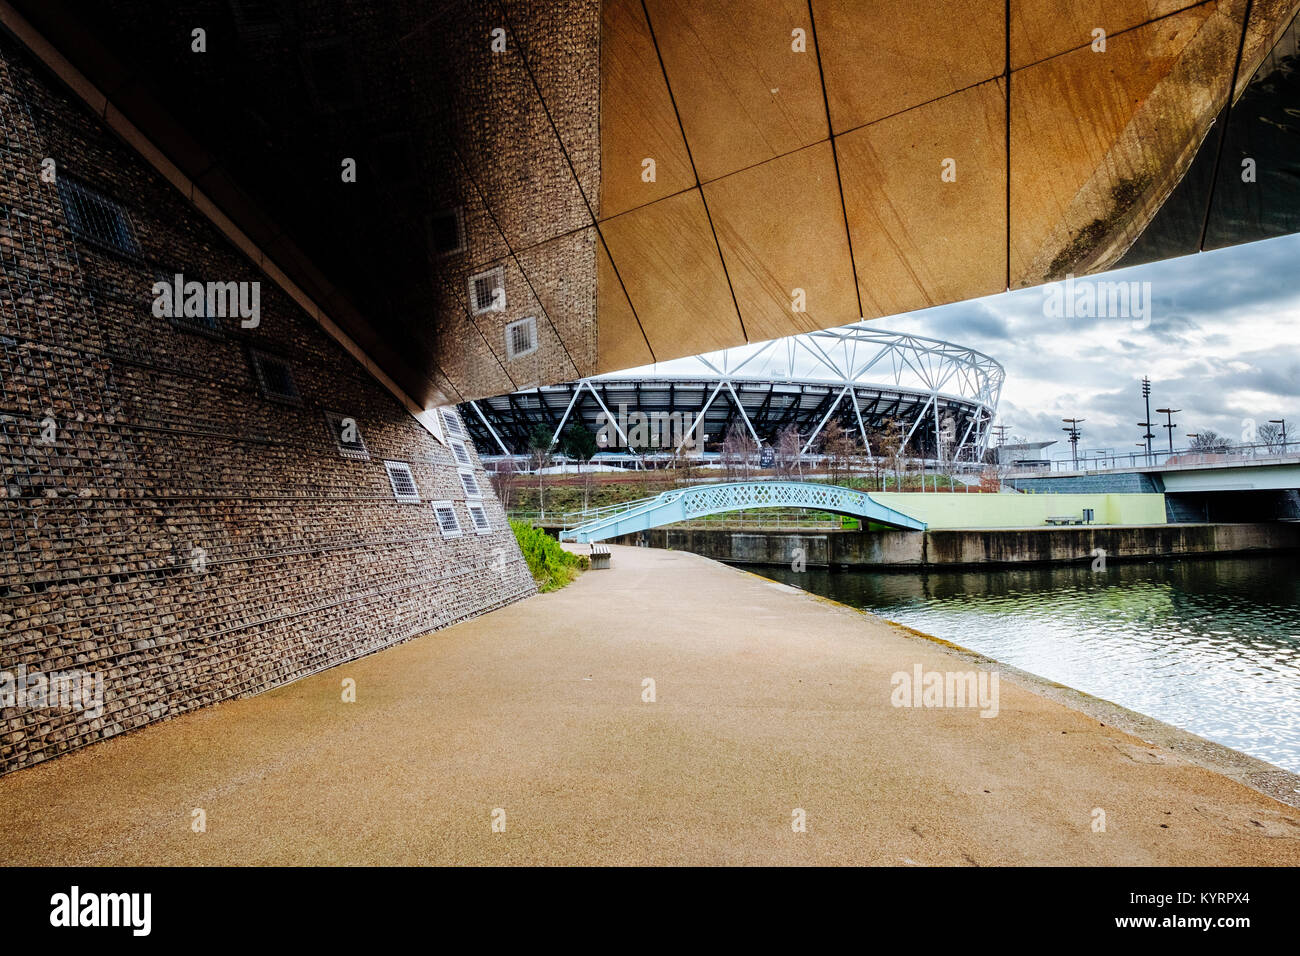 A reflective bridge with the London Olympic Stadium visible in the background Stock Photo